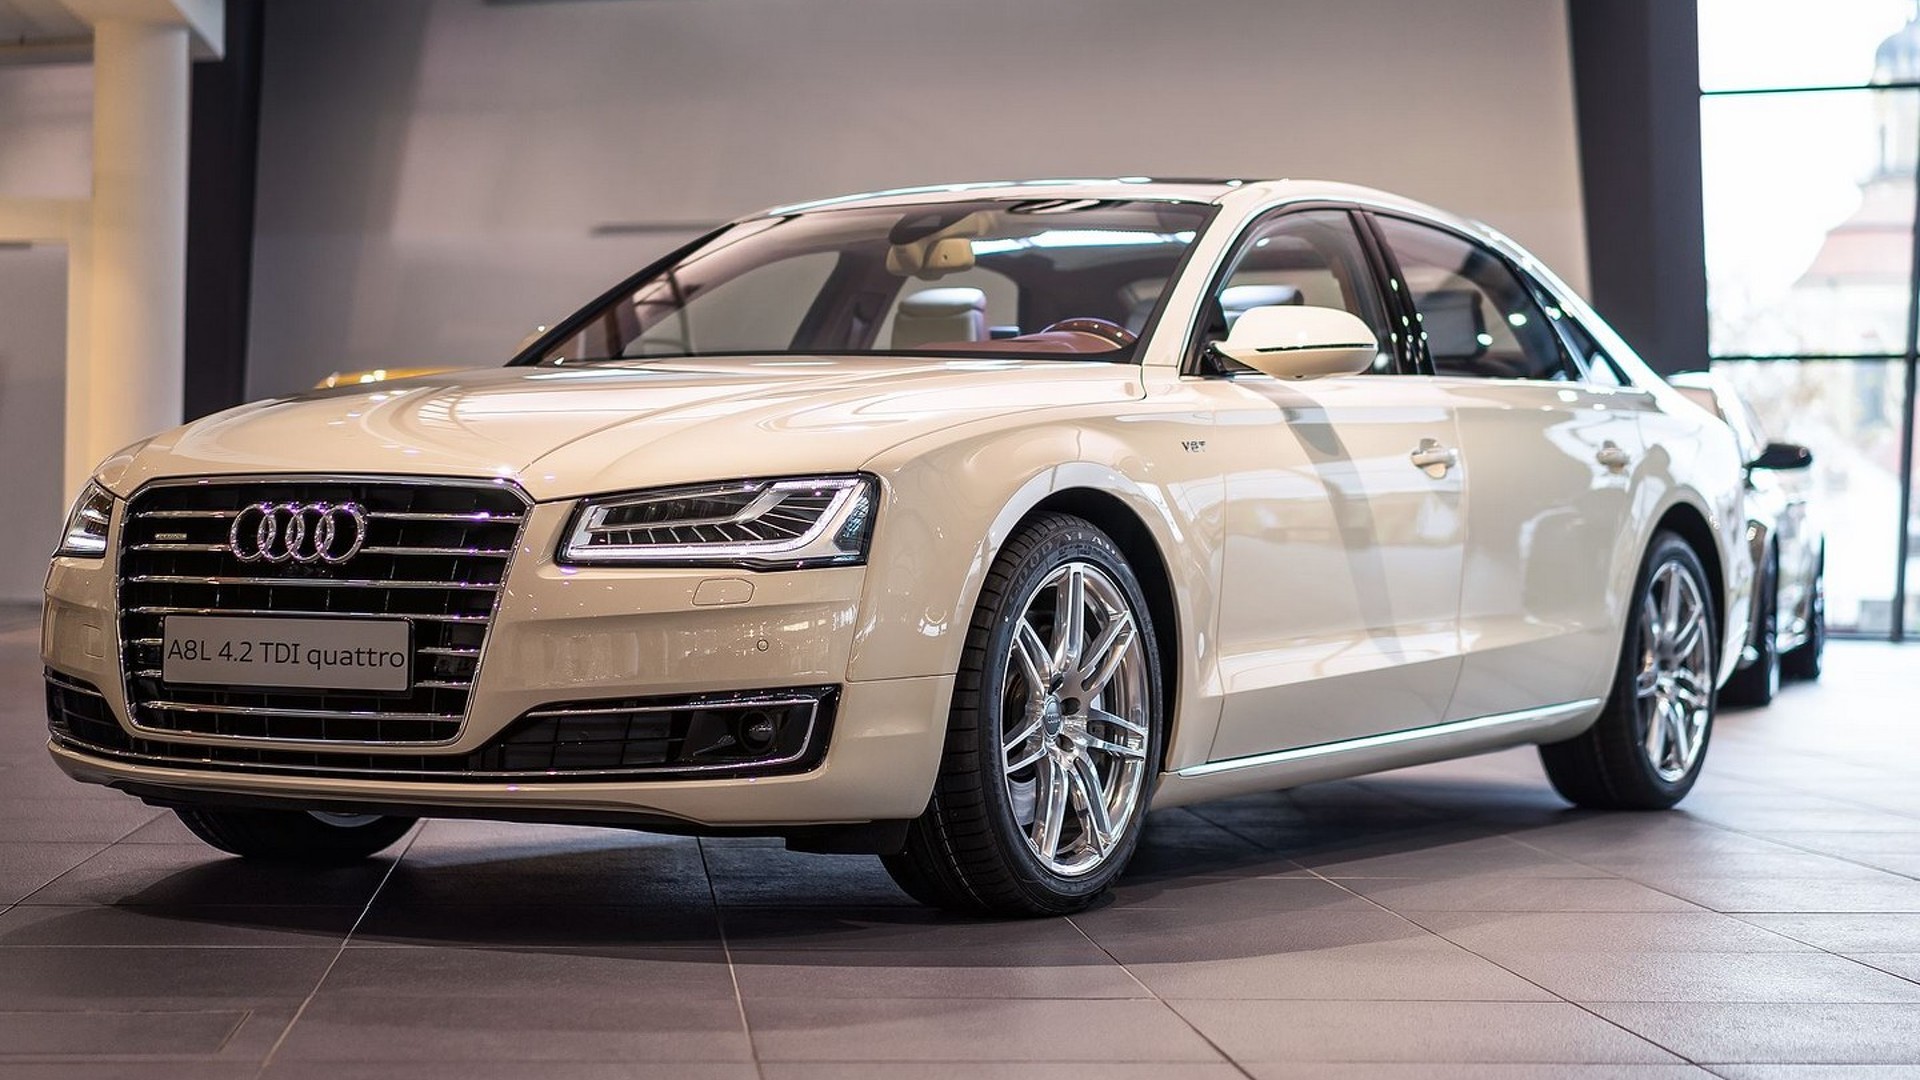 Audi A8 L Magnolia pampered with fancy Exclu